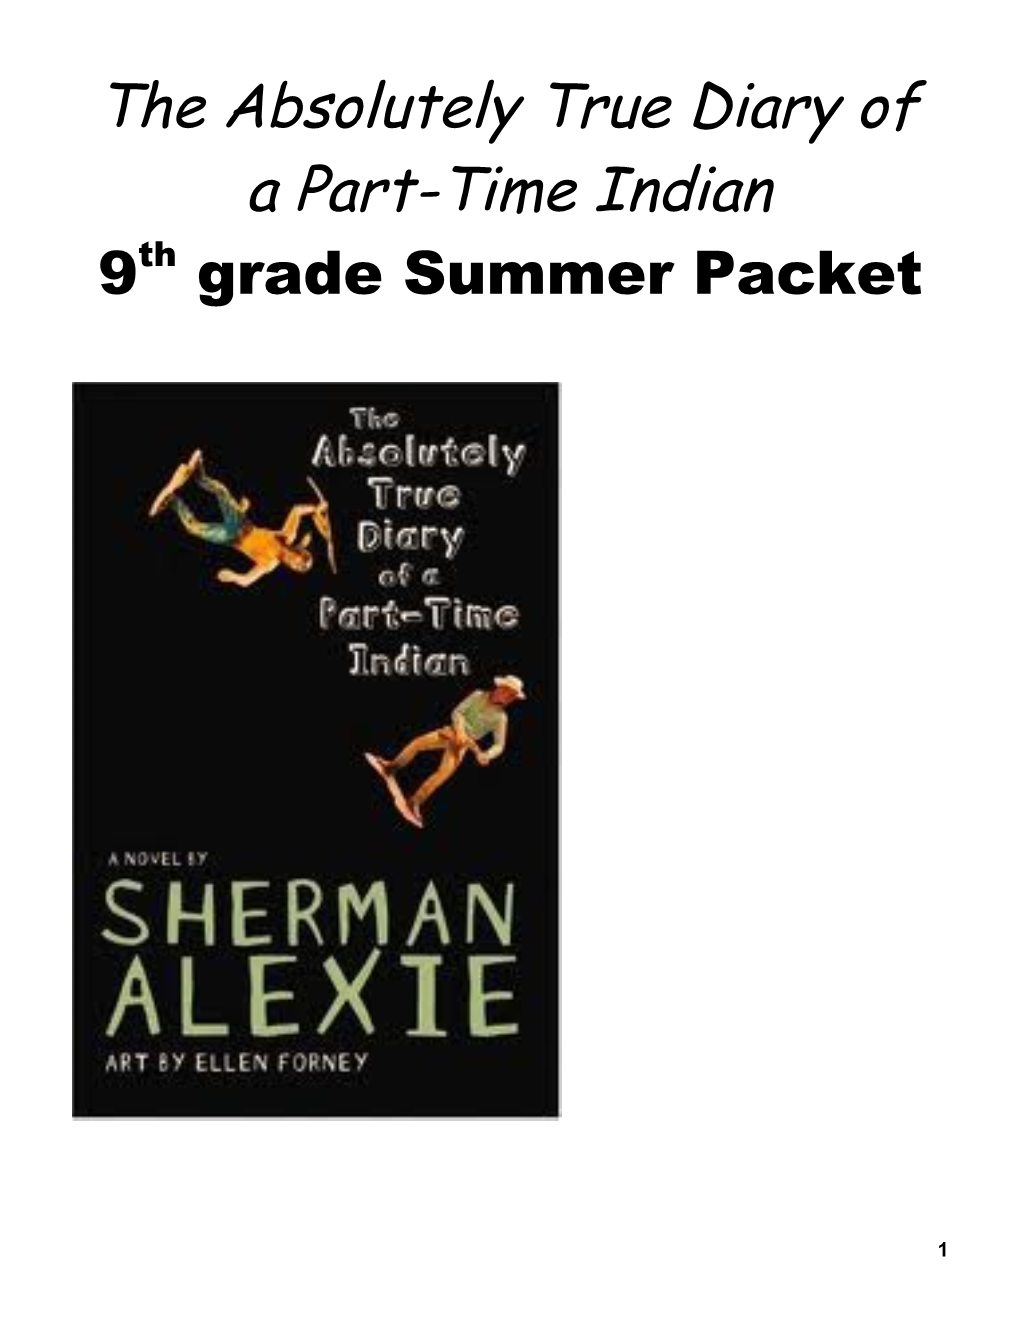 The Absolutely True Diary Of A Part-Time Indian By Sherman Alexie